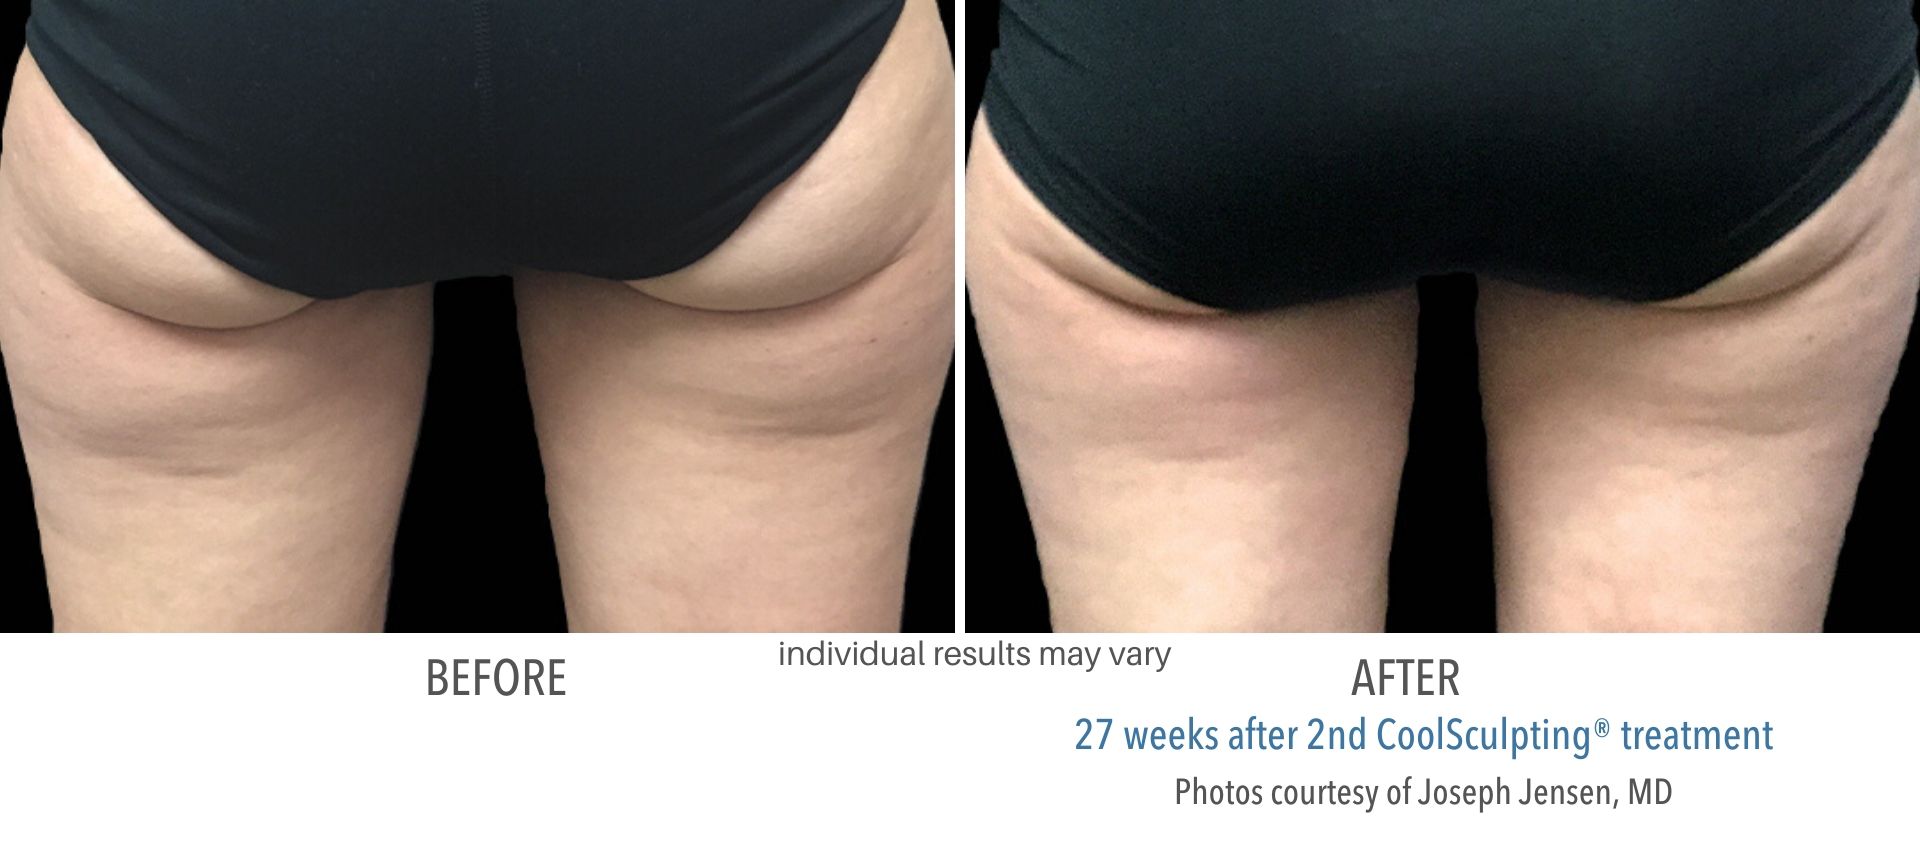 coolsculpting before and after buttocks Laser + Skin Institute in Chatham, NJ